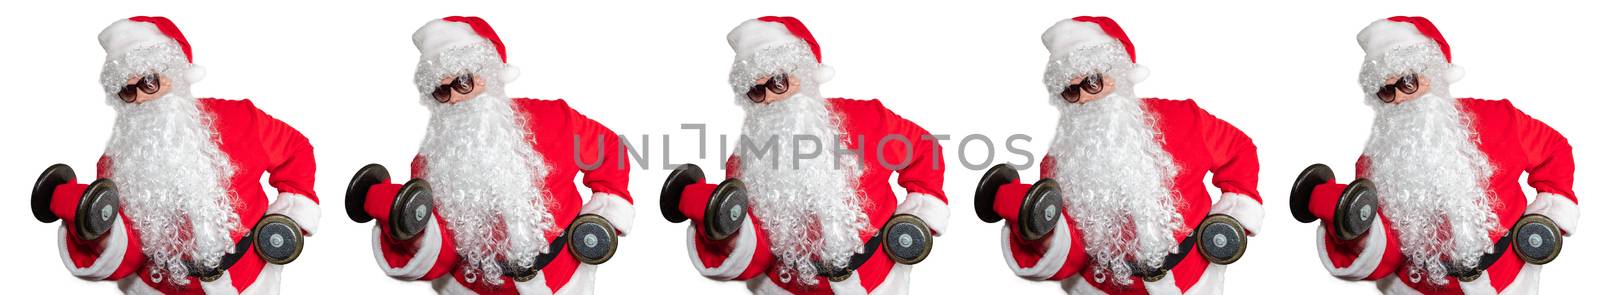 Santa Clauses working out, lifting dumbbells and doing bicep curls. Pattern style, Isolated on white background. Sport, fitness, bodybuilding conept. Banner size, copy space by DamantisZ